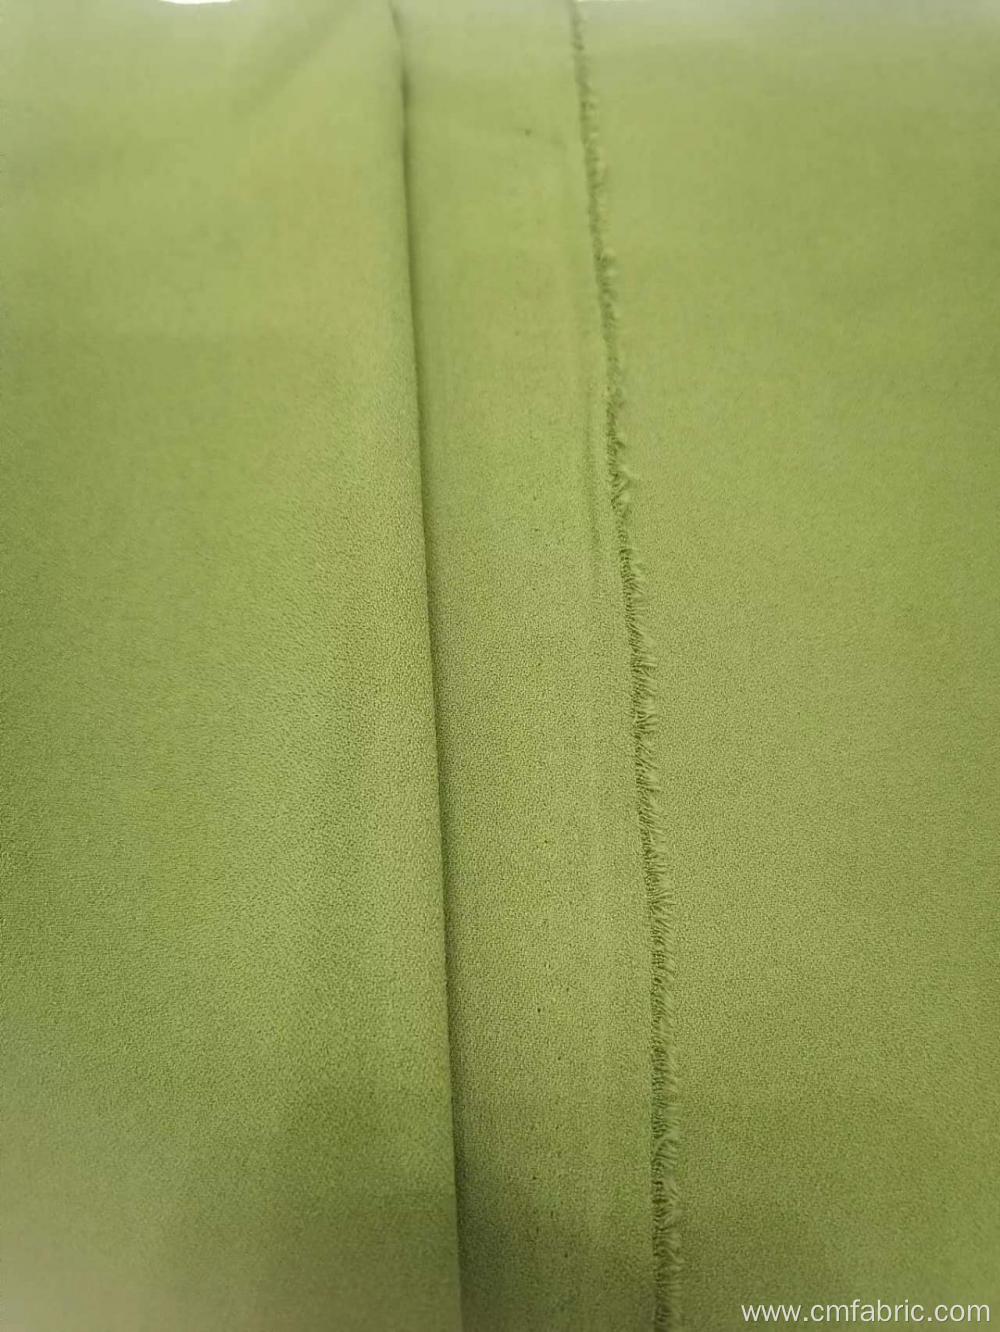 CEY moss crepe 100% polyester woven dyed fabric